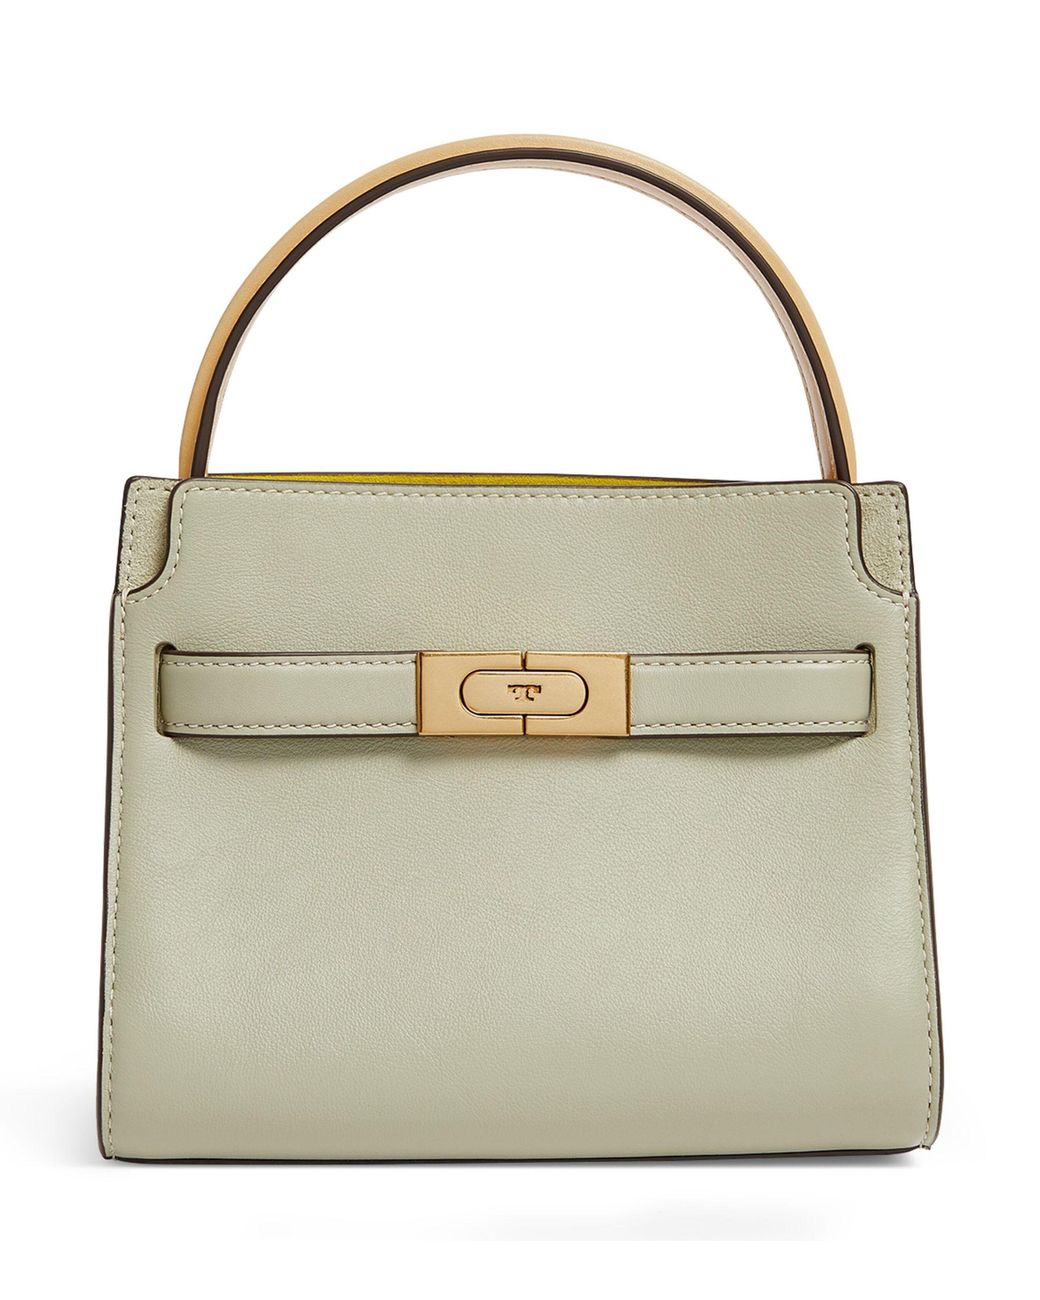 Tory Burch Petite Leather Lee Radziwill Double Top-handle Bag in Green ...